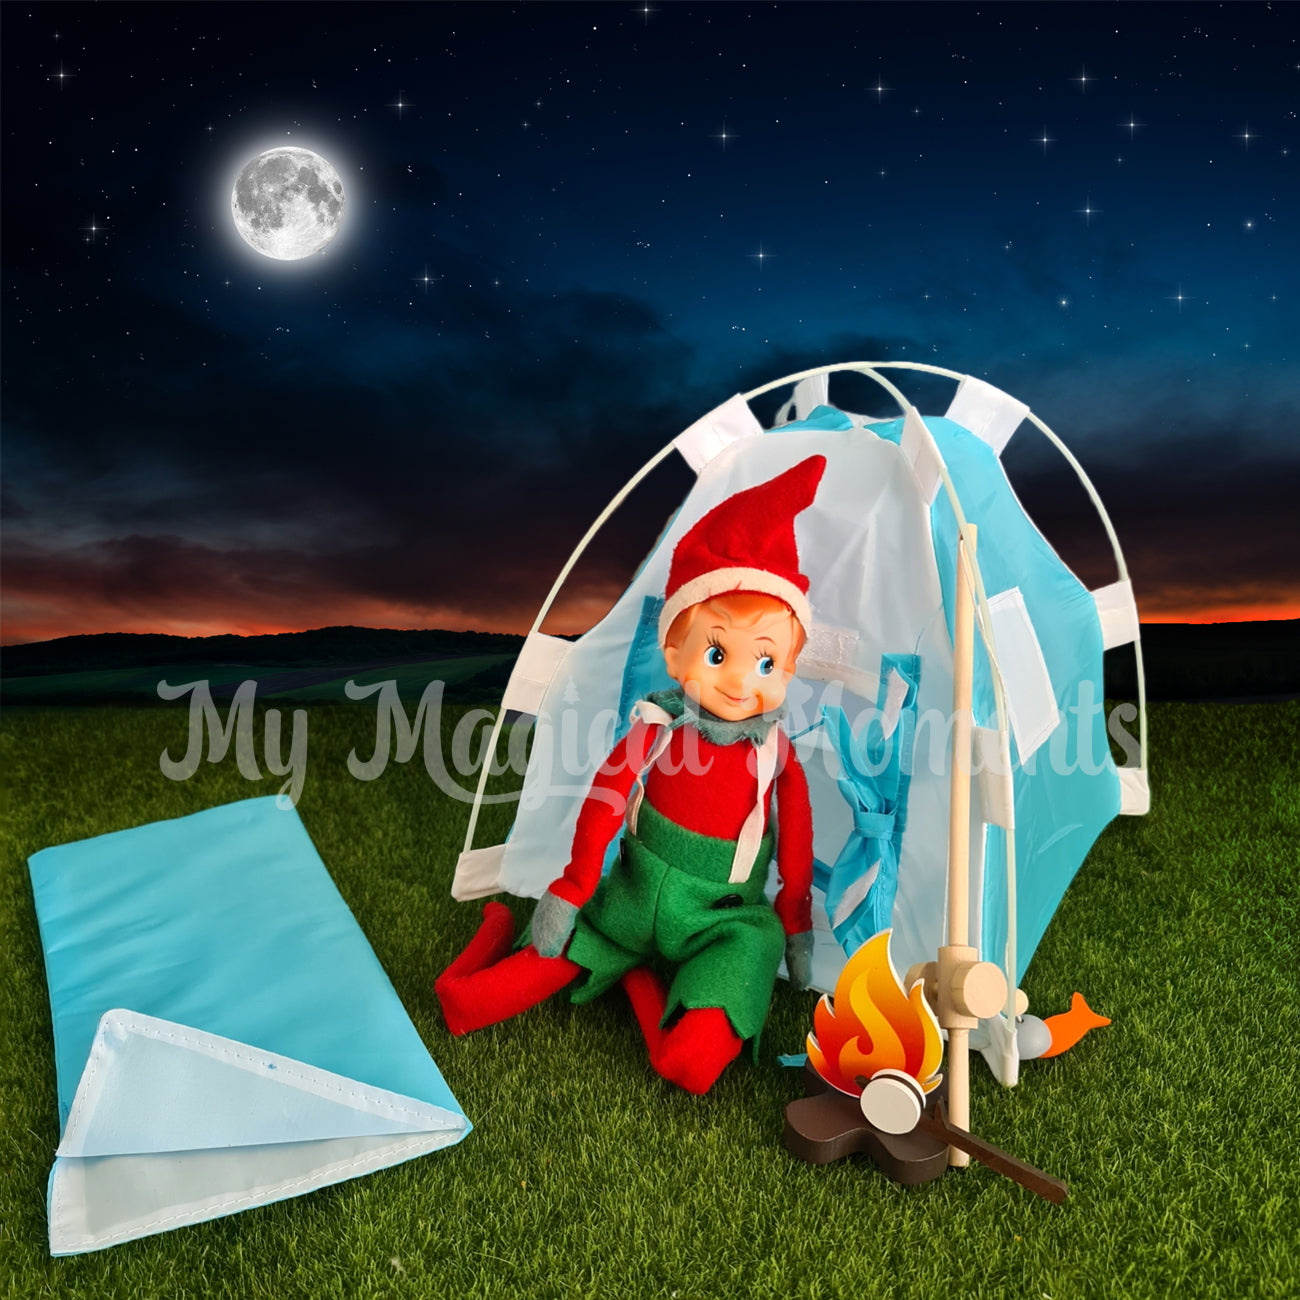 Elf for christmas camping with a tent, sleeping bag and miniature fire pit